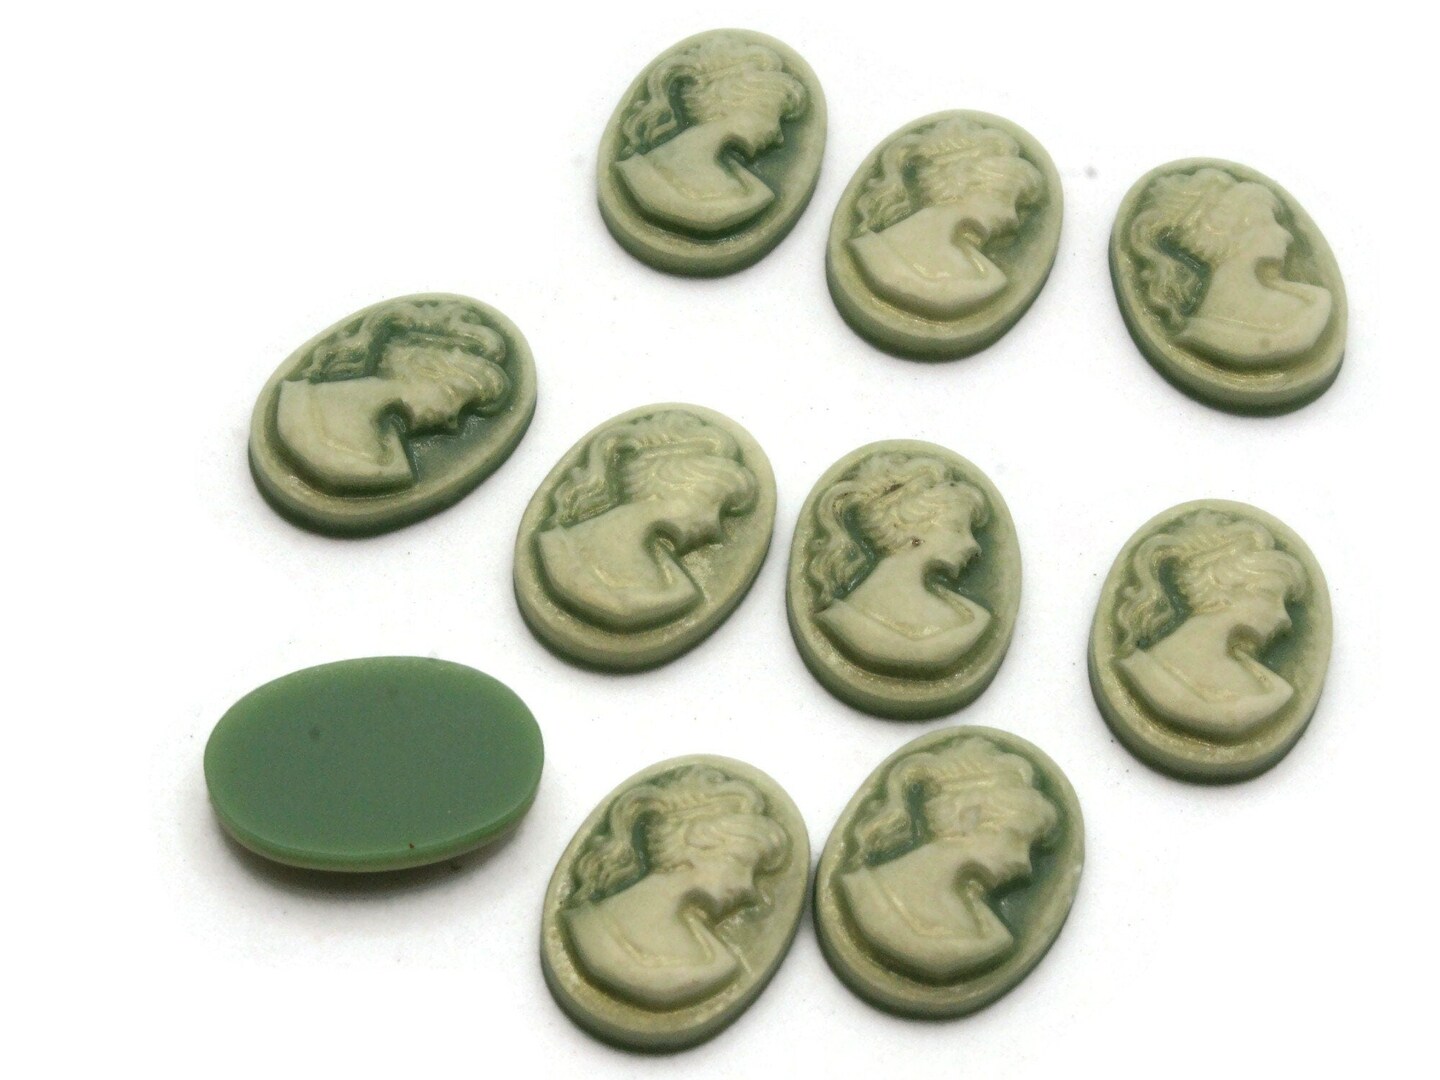 10 18mm x 13mm Green Greek Woman Face Cameo Cabochons